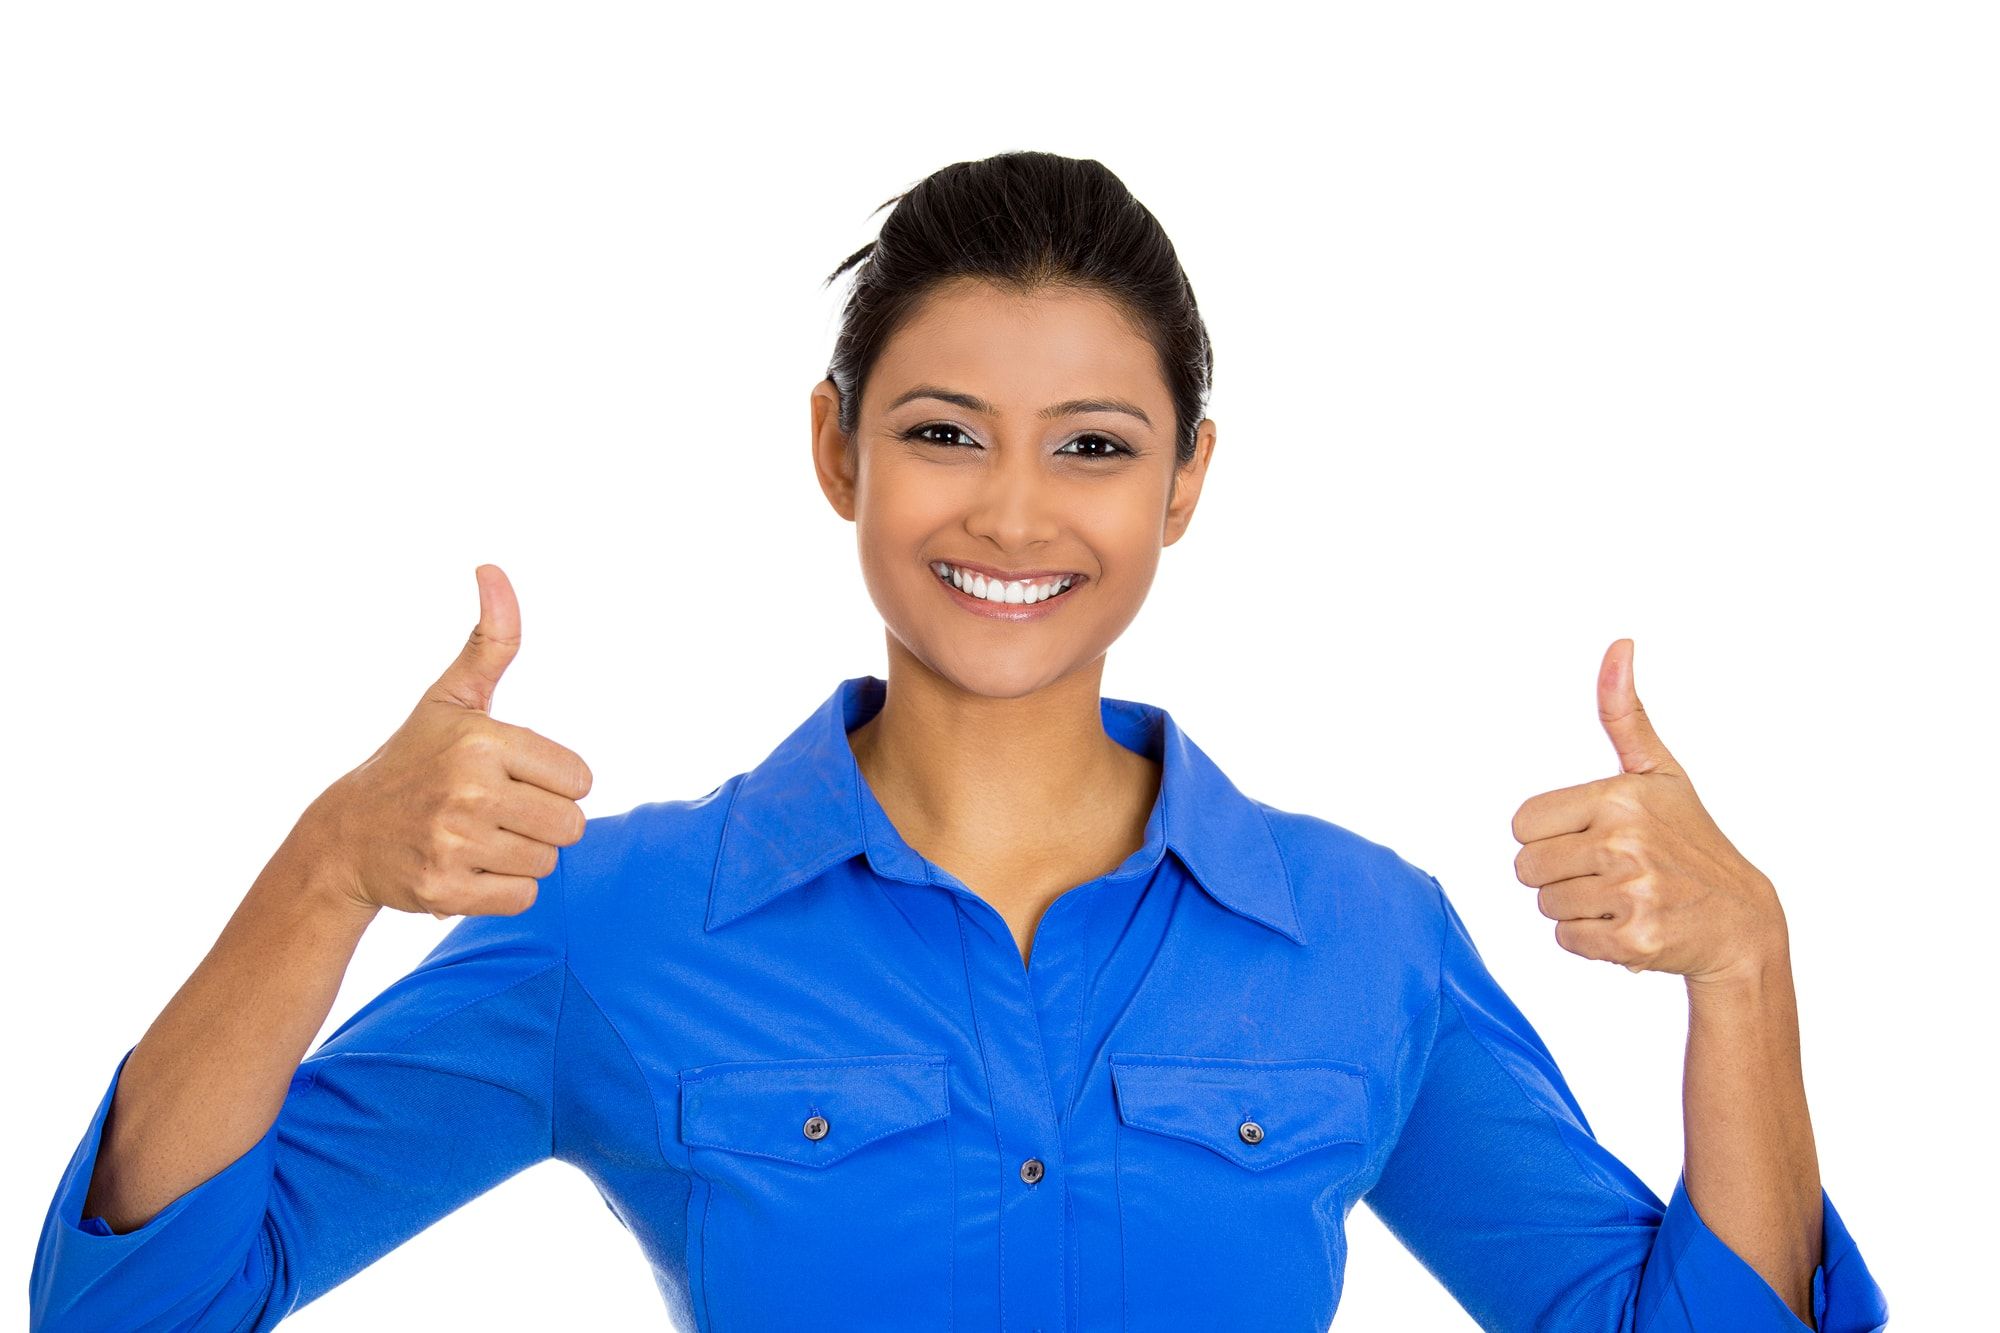 Closeup portrait of young pretty woman with two thumbs up sign gesture pointing at you, isolated on white background. Positive emotion facial expression feelings, signs and symbols, body language